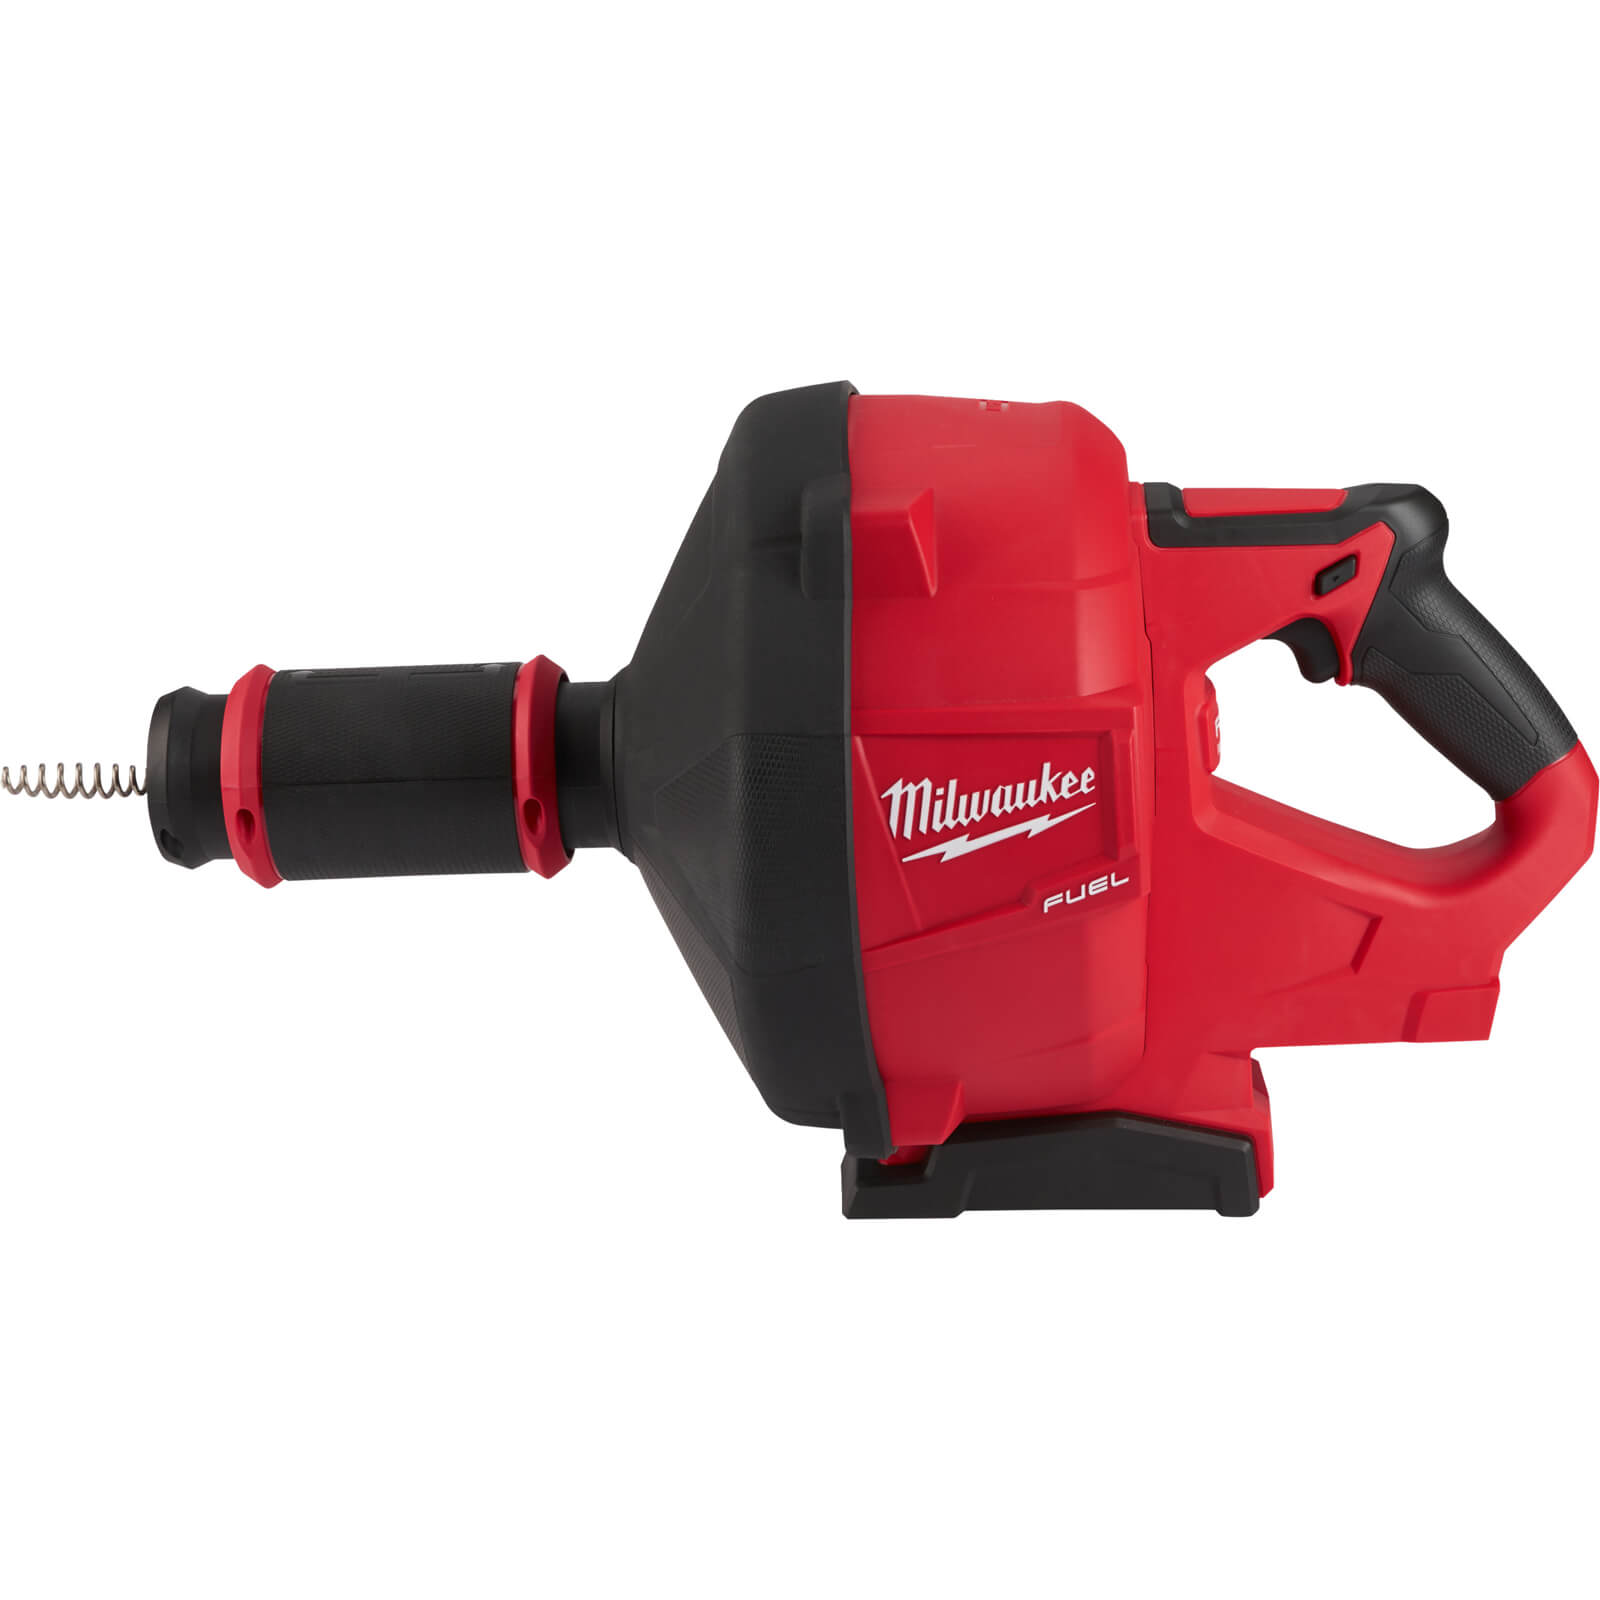 Image of Milwaukee M18 FDCPF10 Fuel 18v Cordless Brushless Drain Cleaner No Batteries No Charger No Case